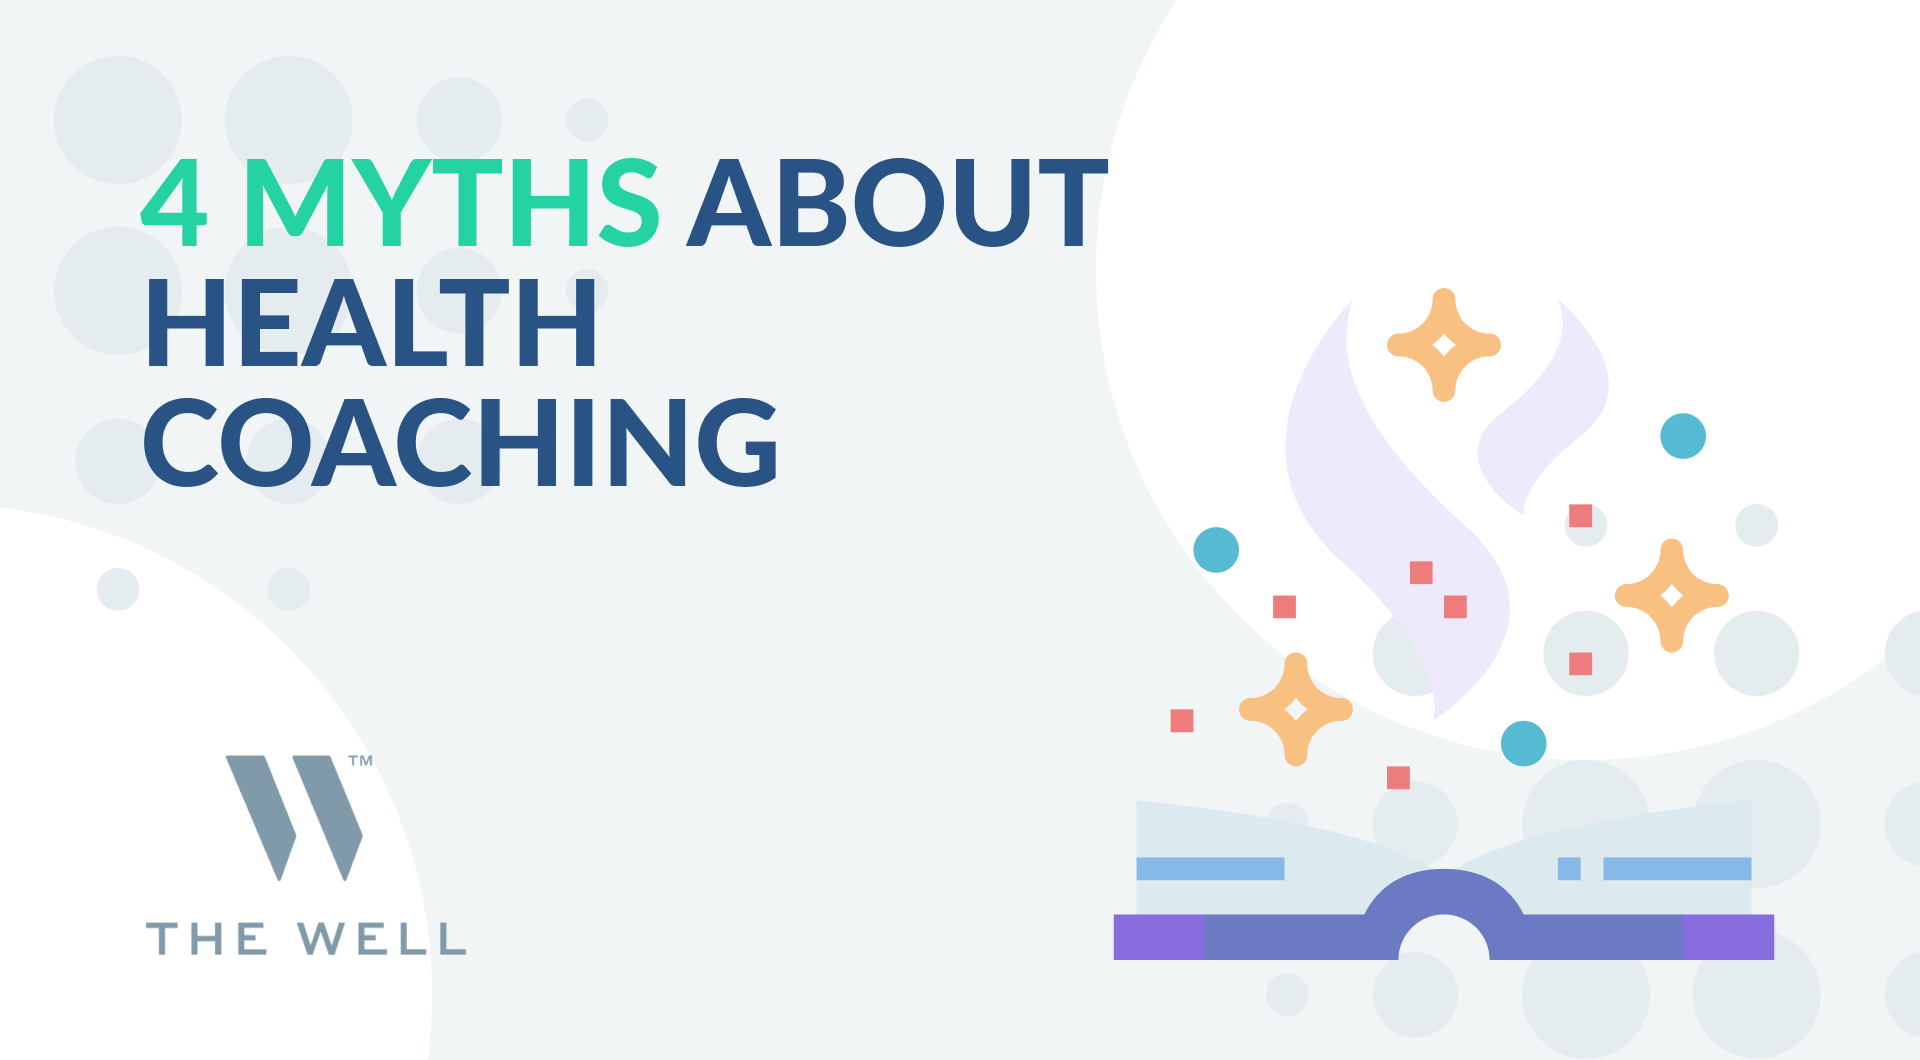 4 Myths About Health Coaching